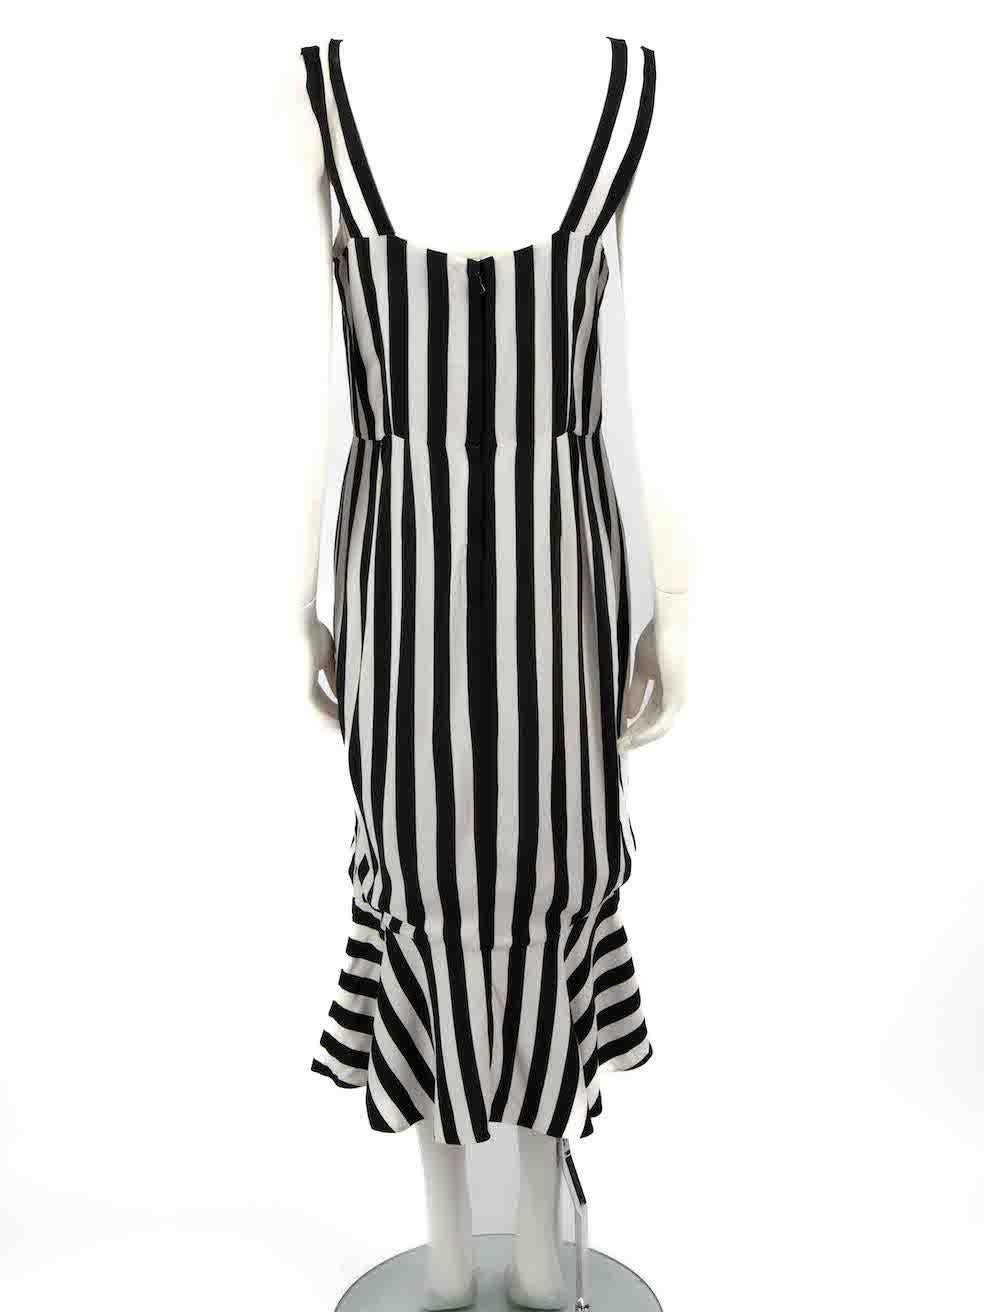 Dolce & Gabbana Black & White Striped Dress Size L In Good Condition For Sale In London, GB